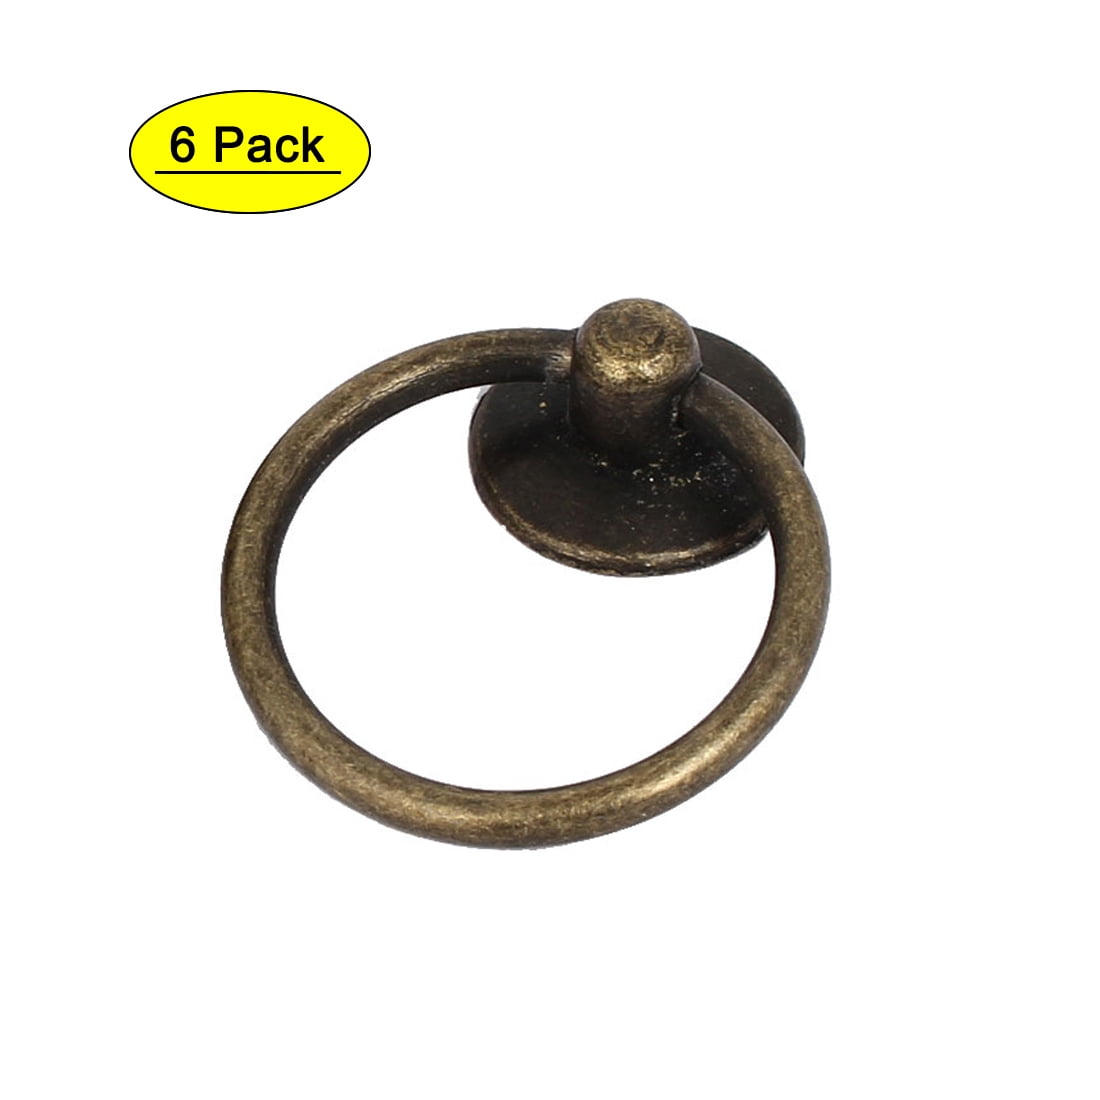 Vintage Retro 4Pcs Brass Drawer Pull Handle Rings for Home Decor Hardware Handle 